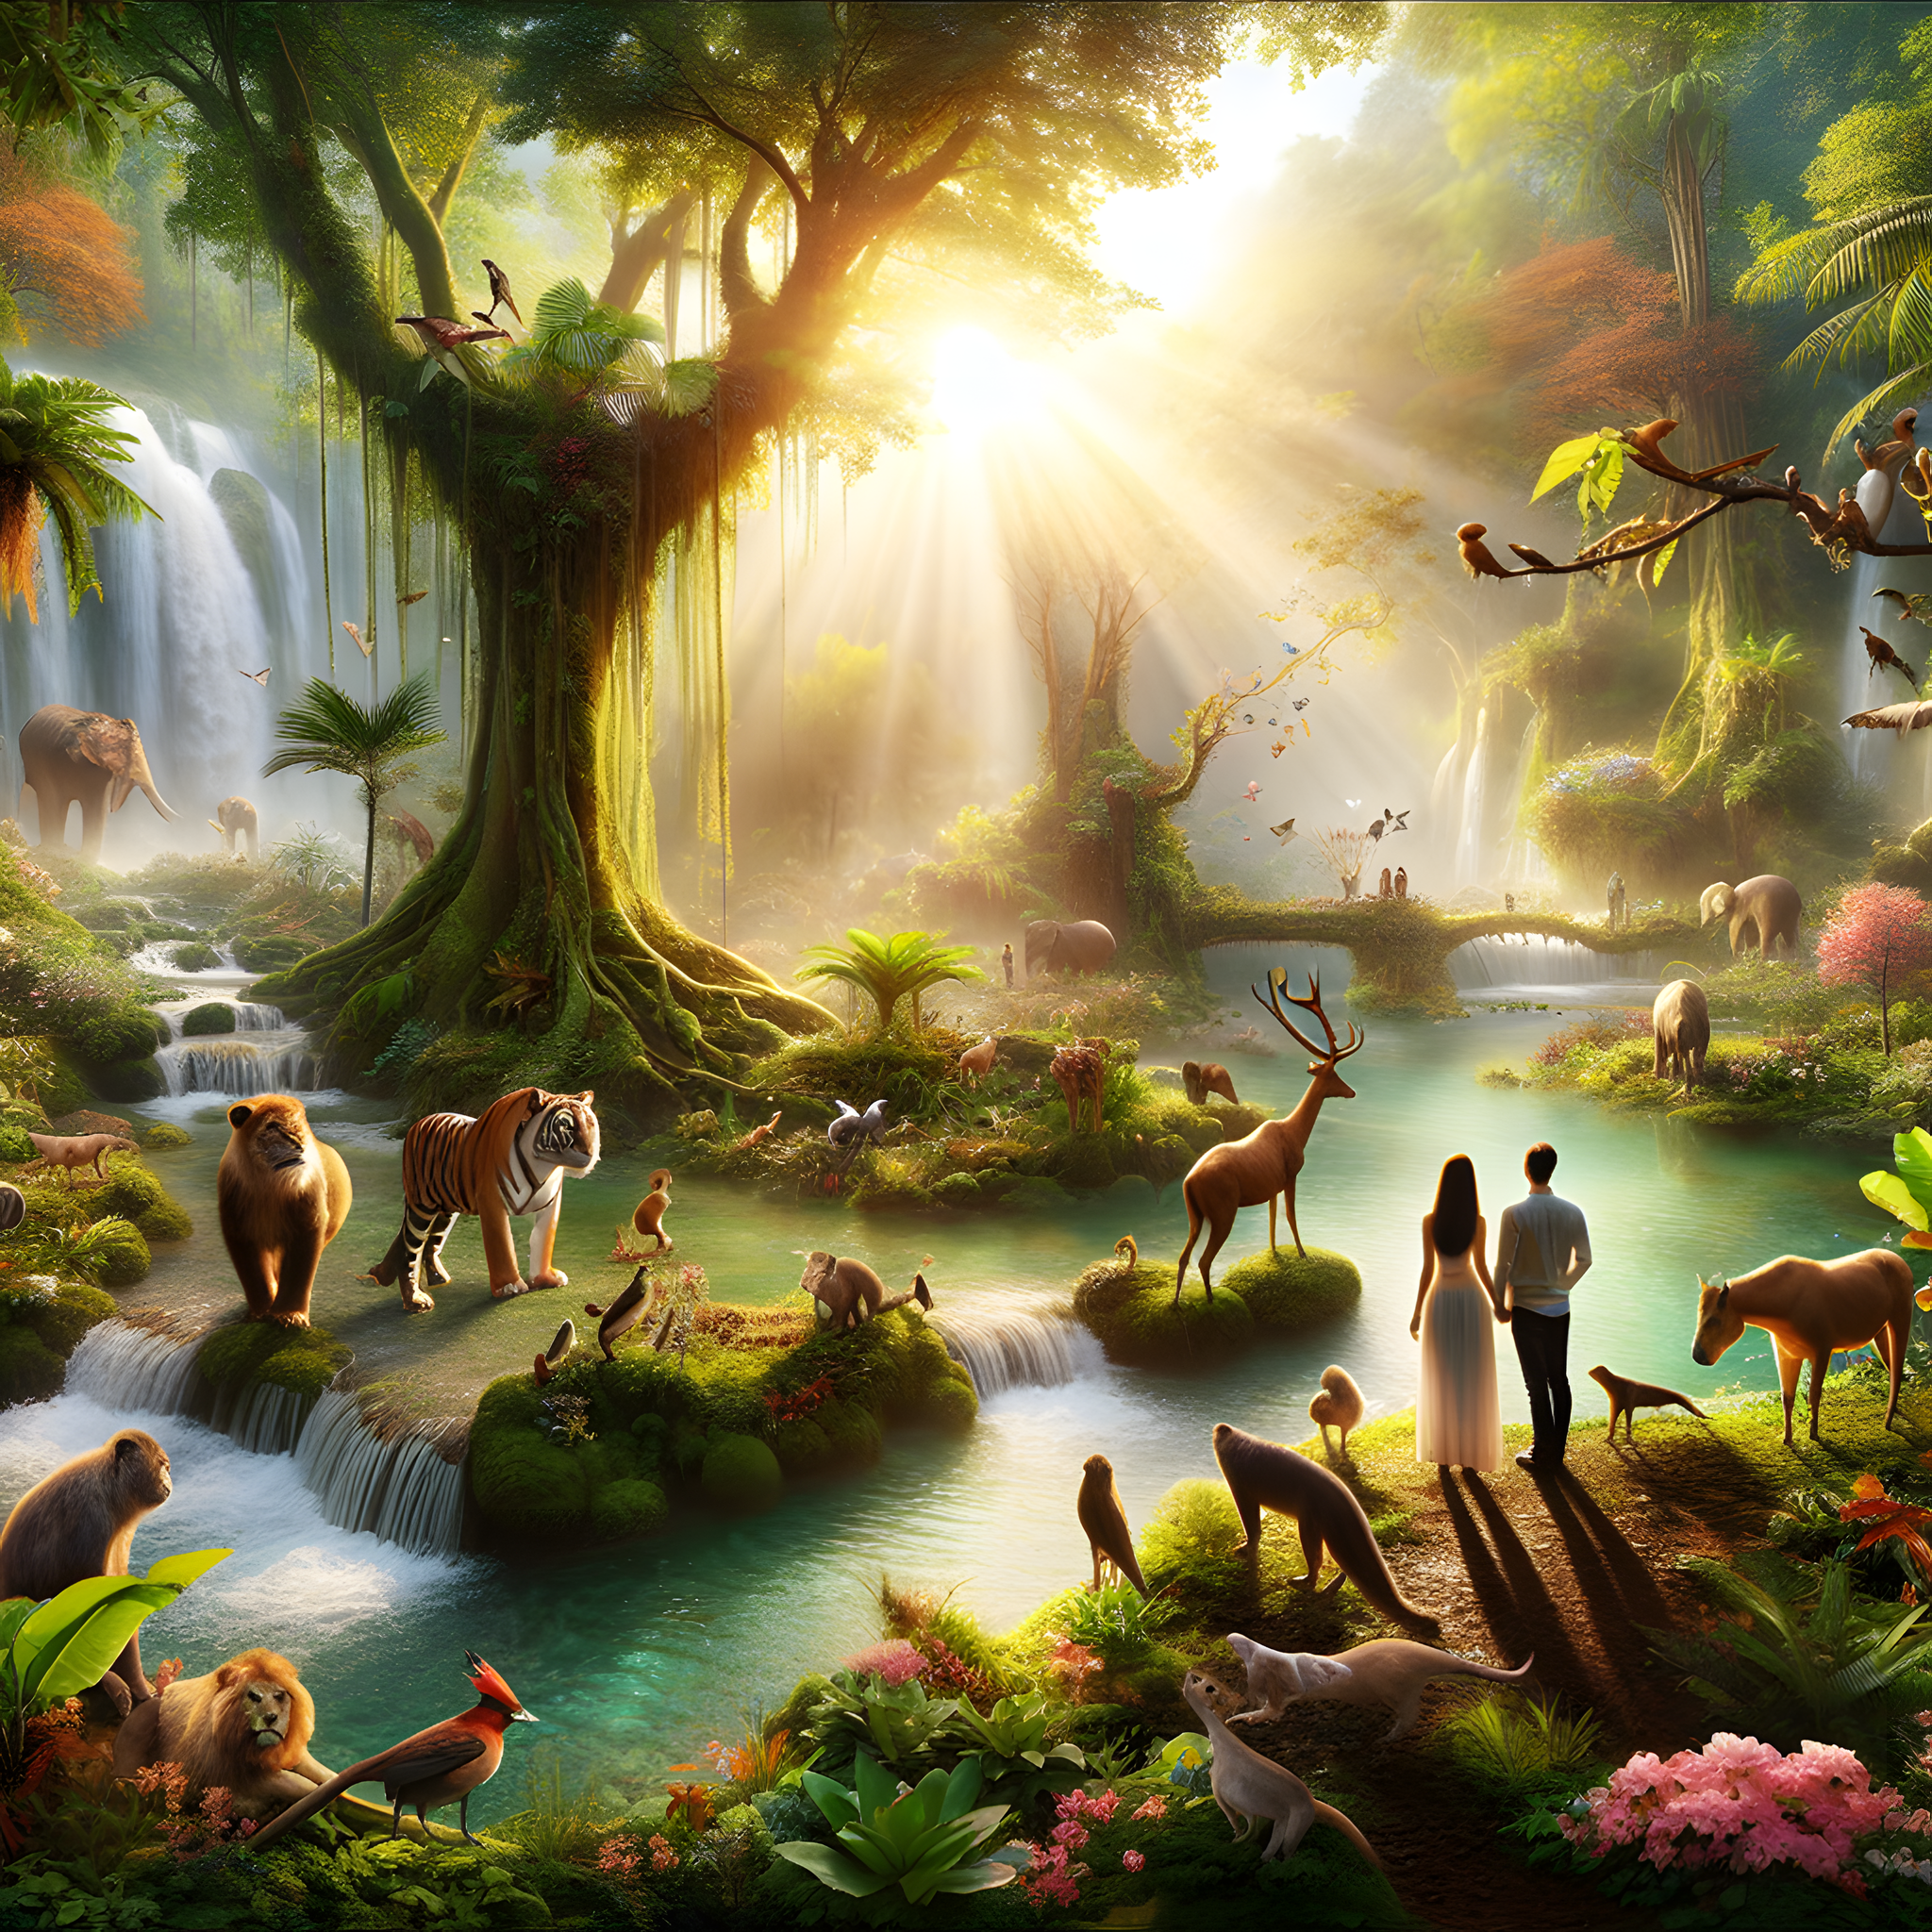 Adam and Eve in the Garden of Eden with animals